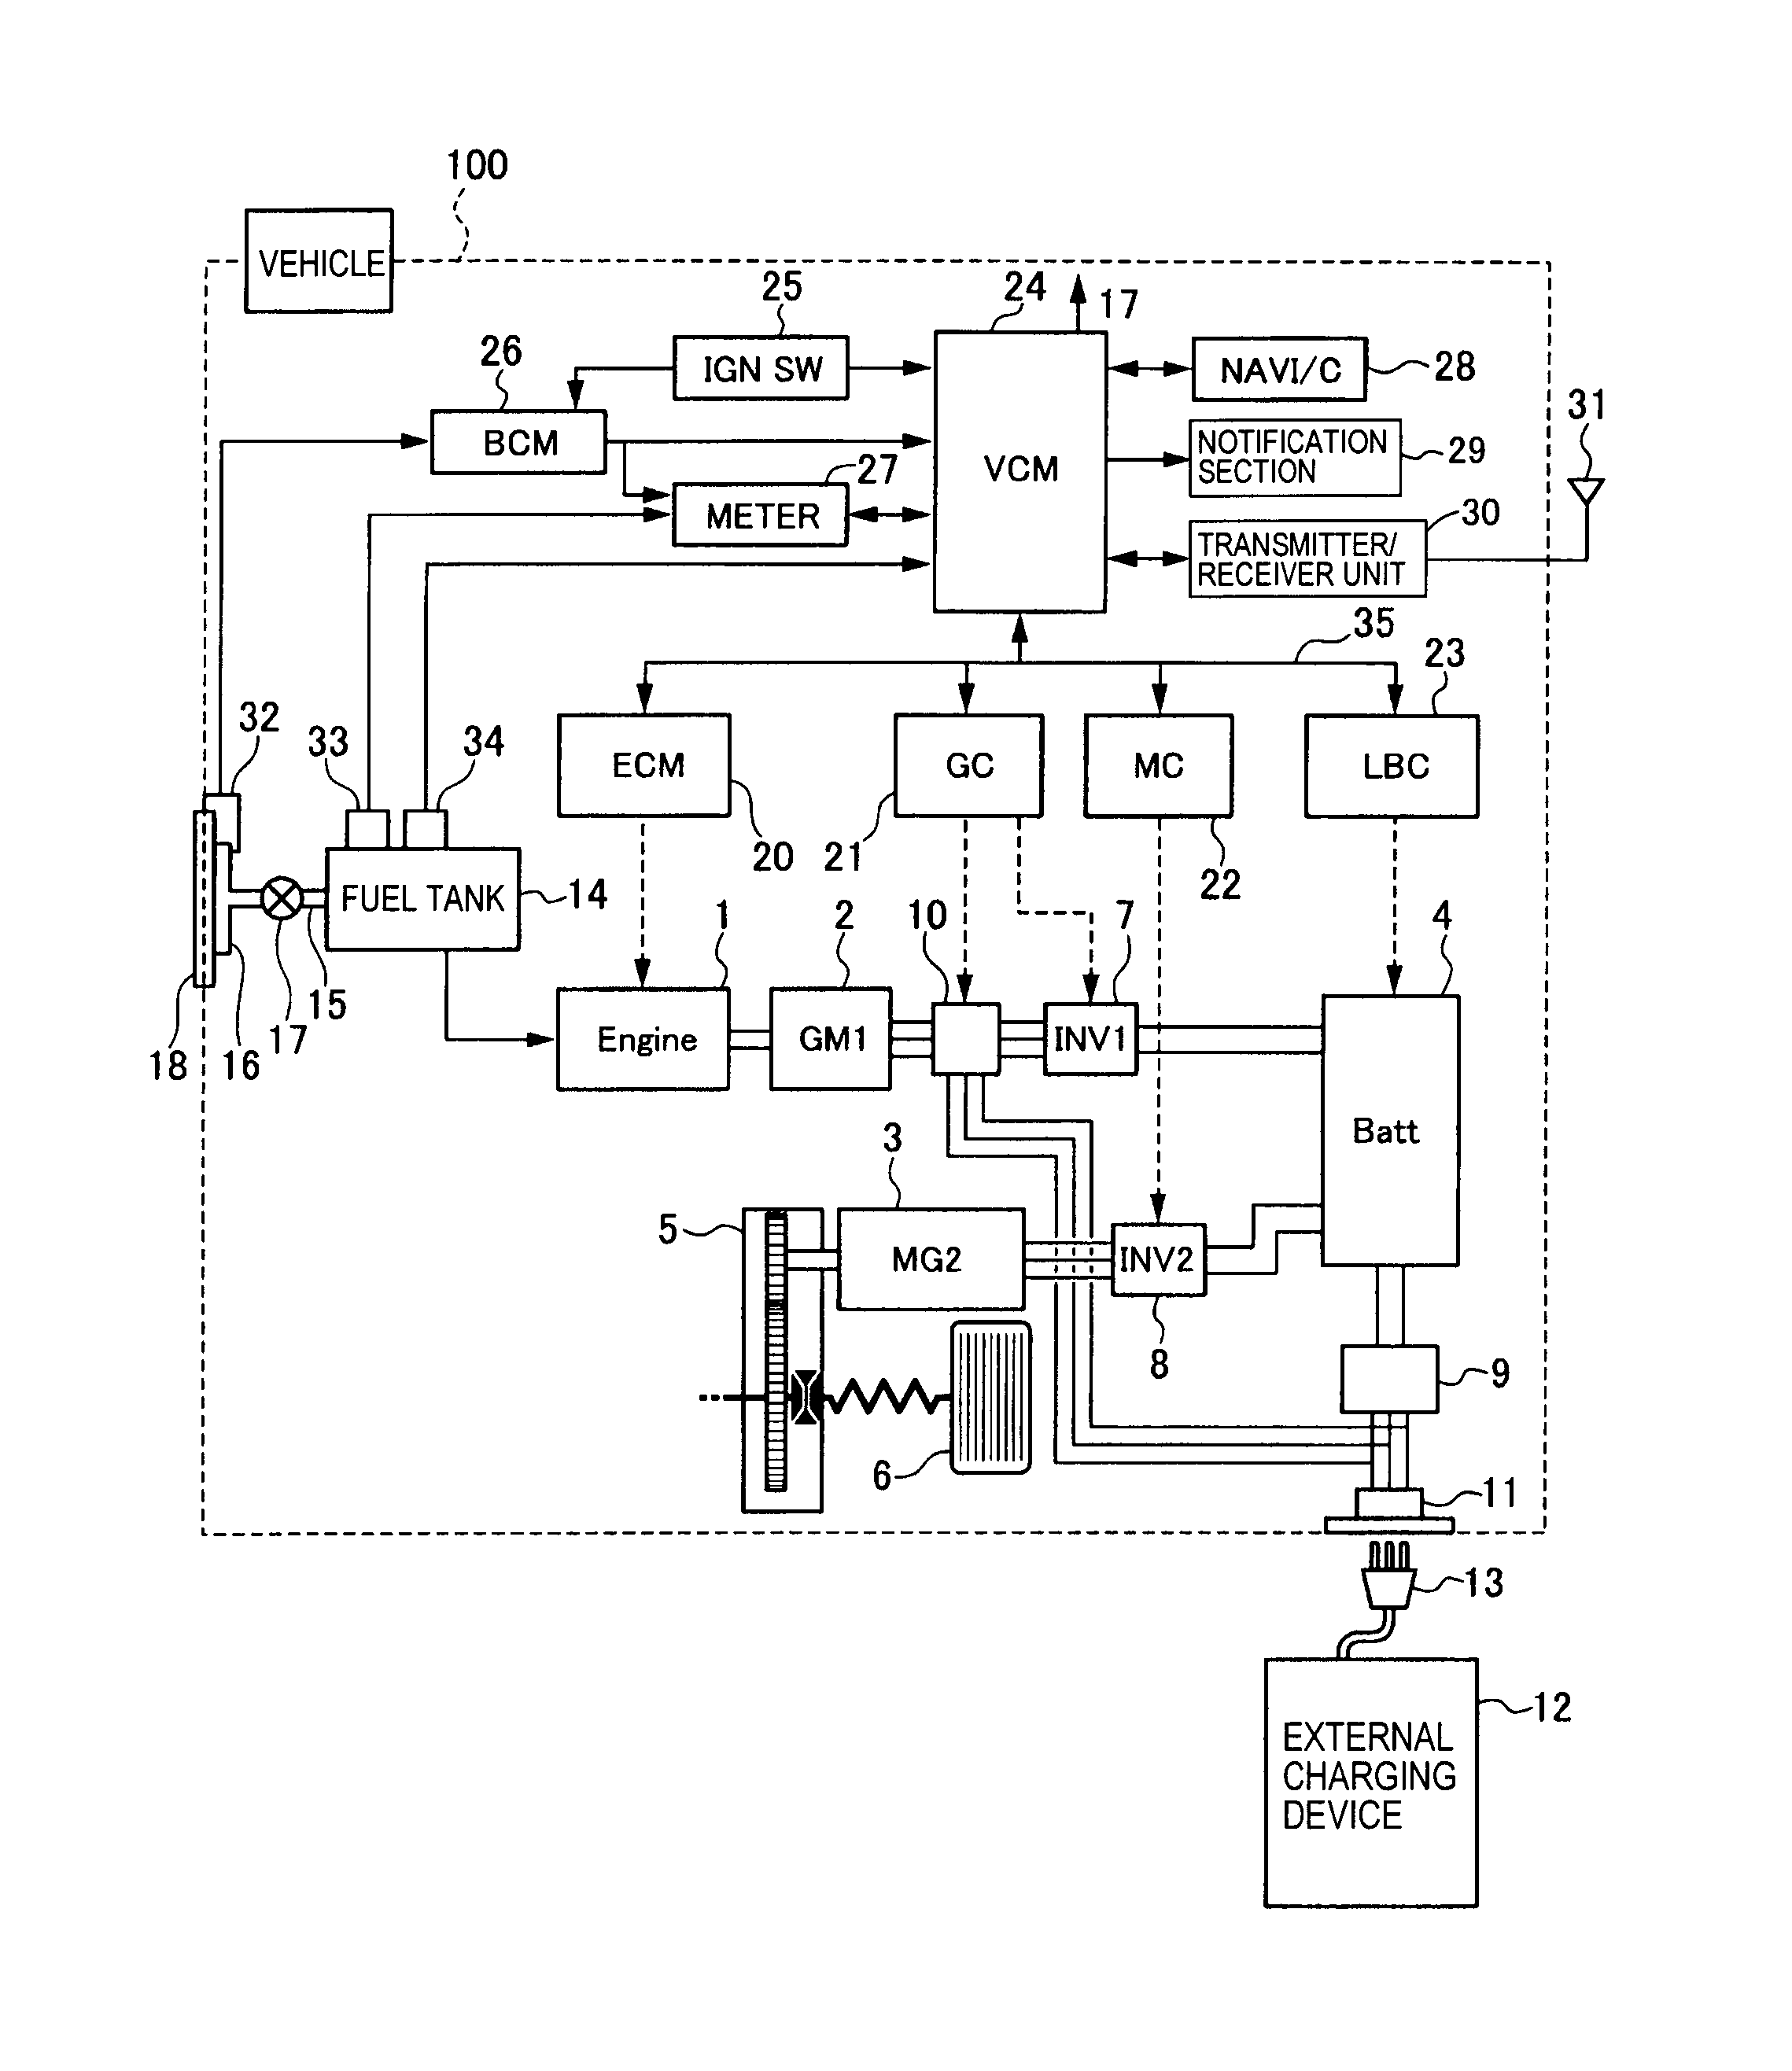 1979 Ford F150 Ignition Wiring Diagram from diagramweb.net